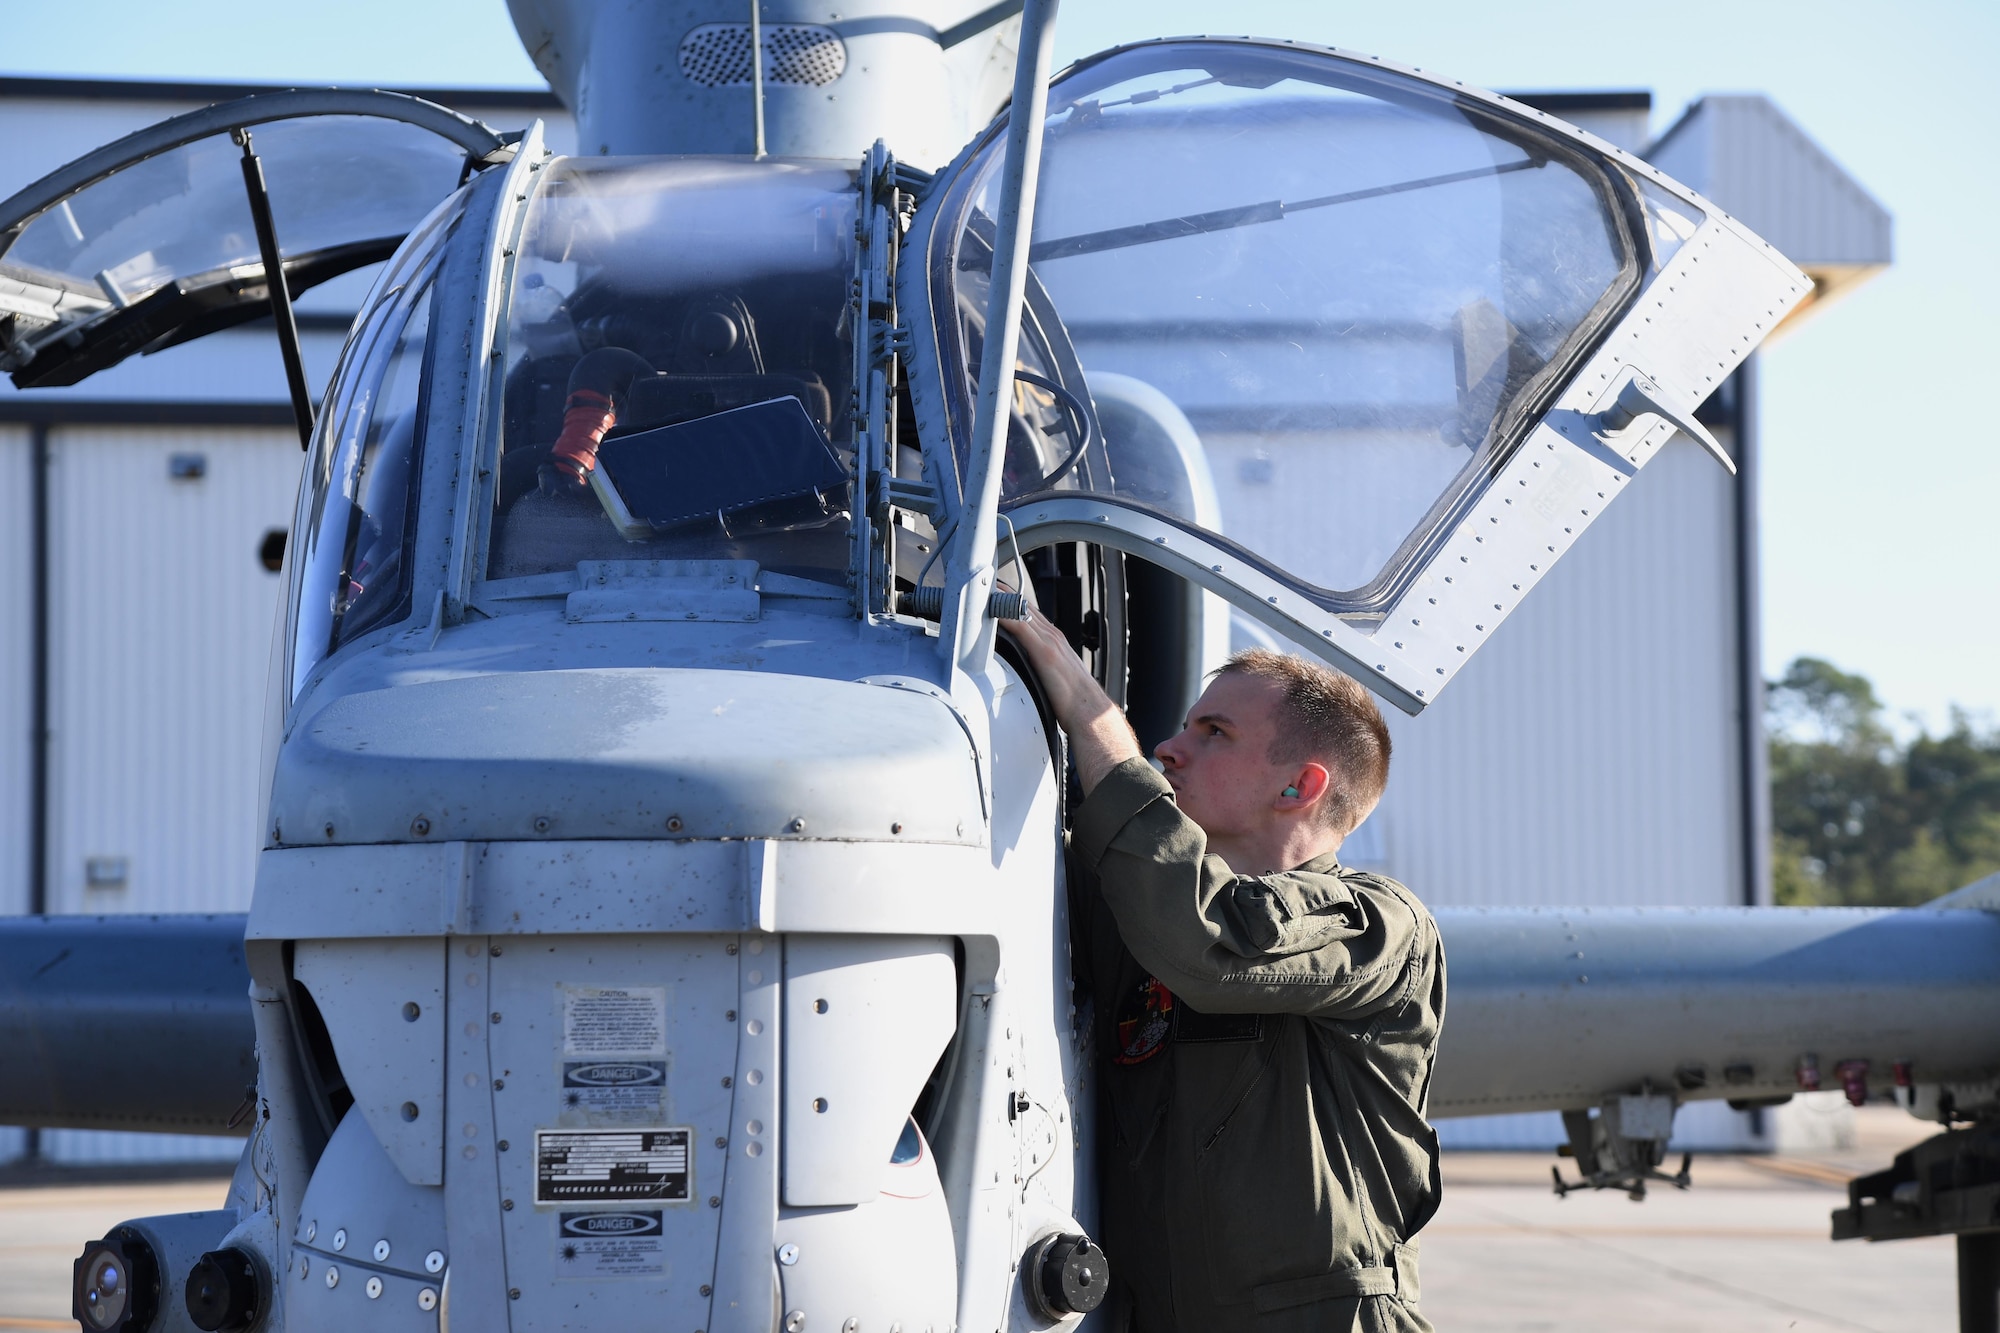 U.S. Marine Corps Capt. Jeffrey Jaeckel, Marine Light Attack Helicopter Squadron 167 AH-1Z Cobra pilot, Marine Corps Air Station New River, North Carolina,  conducts a pre-flight inspection on an AH-1Z Cobra at Keesler Air Force Base, Mississippi, Oct. 21, 2020. Two AH-1Z Cobras and two UH-1Y Hueys were at Keesler for joint training with the Marine Special Operations Command during their RAVEN exercise from Oct. 12-21. RAVEN is the exercise Marine Raiders complete after their six-month training cycle in preparation for deployment to ensure operational readiness of the Marine Special Operations Teams. (U.S. Air Force photo by Kemberly Groue)